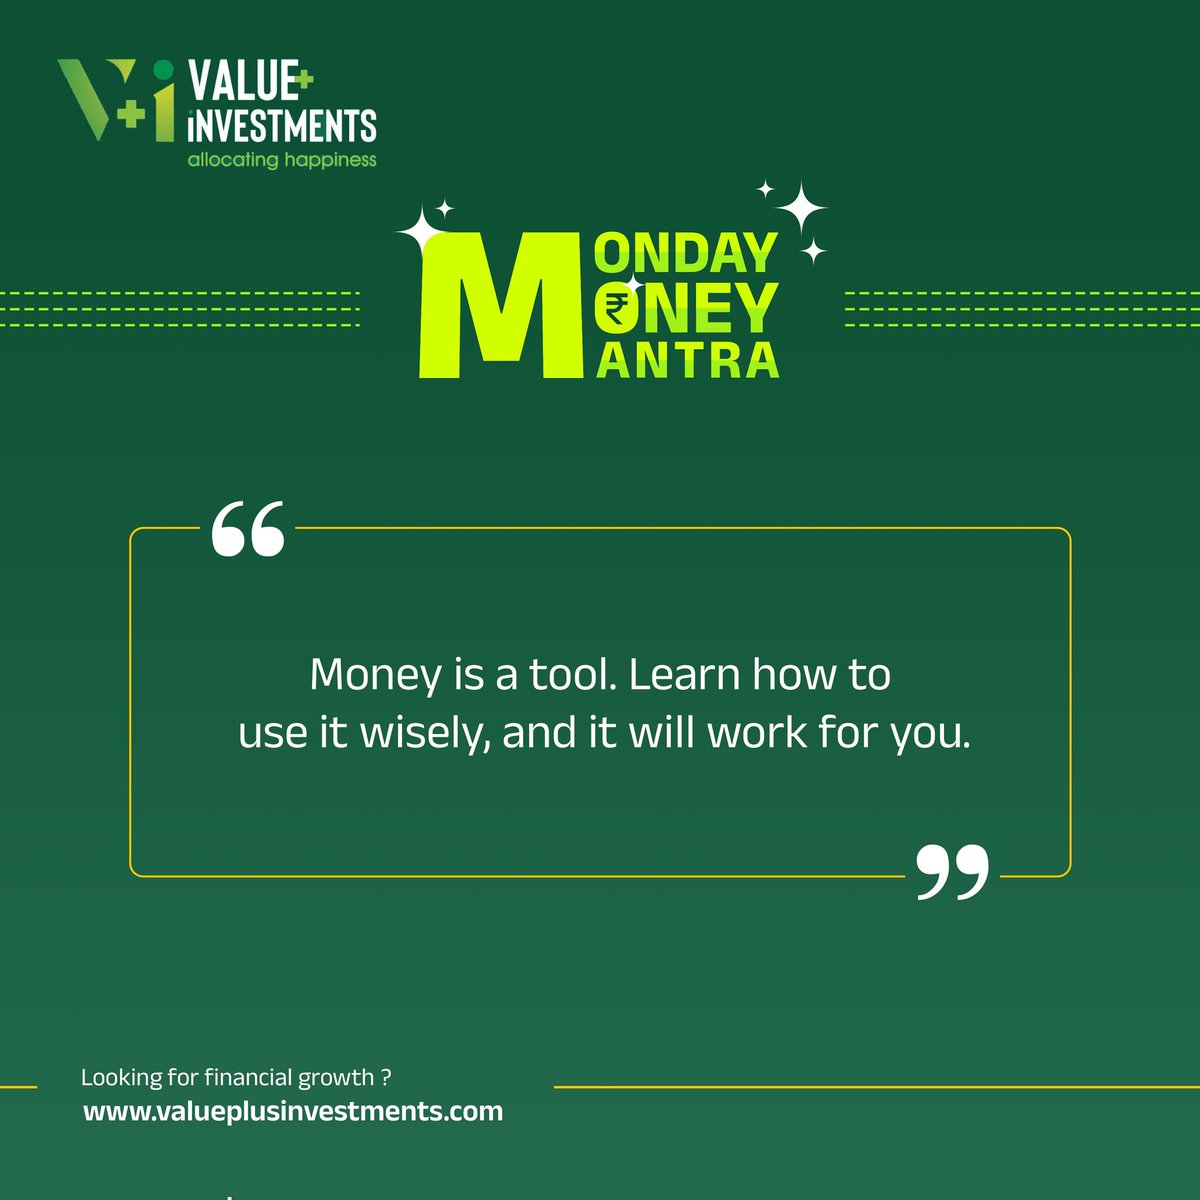 Unlock the potential of your finances with today's insightful quote: 'Money is a tool. Learn how to use it wisely, and it will work for you.' 💰💡

#ValuePlusInvestments
#FinancialWisdom #MoneyMatters #FinancialGoals #MoneyMonday #SmartInvesting #WealthManagement #MoneyTalk